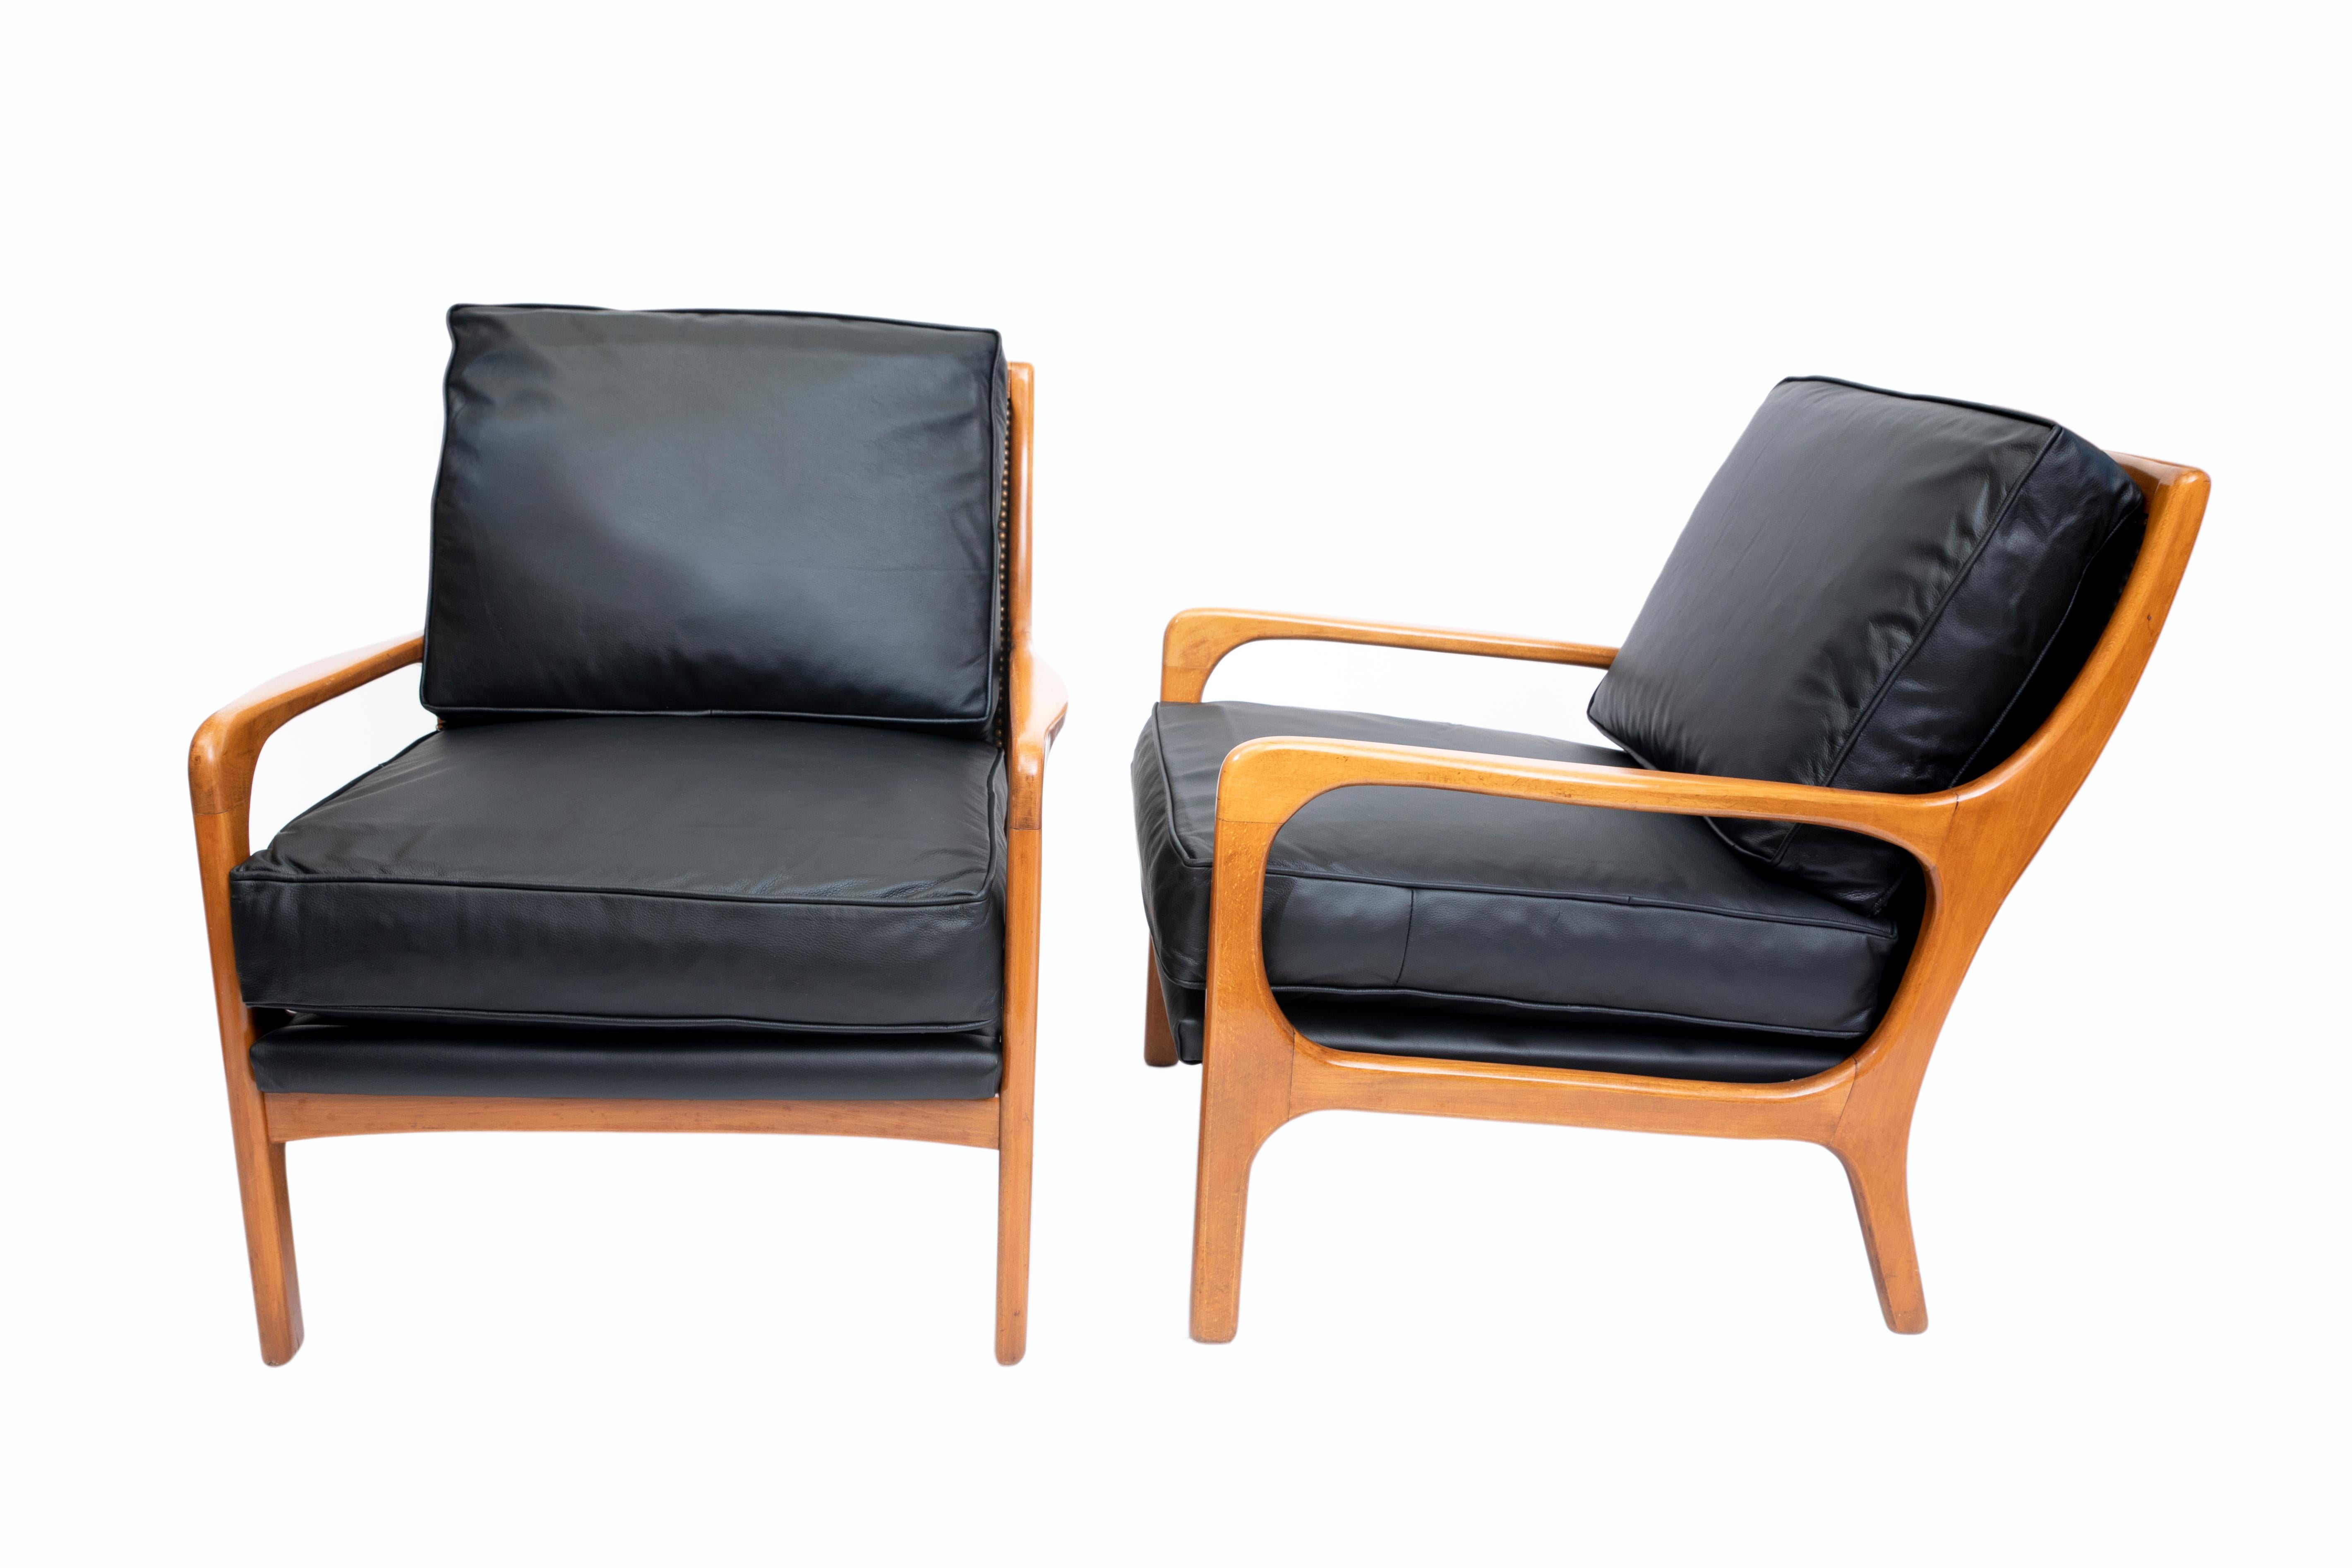 European Pair of Wood and Leather Scandinavian Armchairs, circa 1960 For Sale